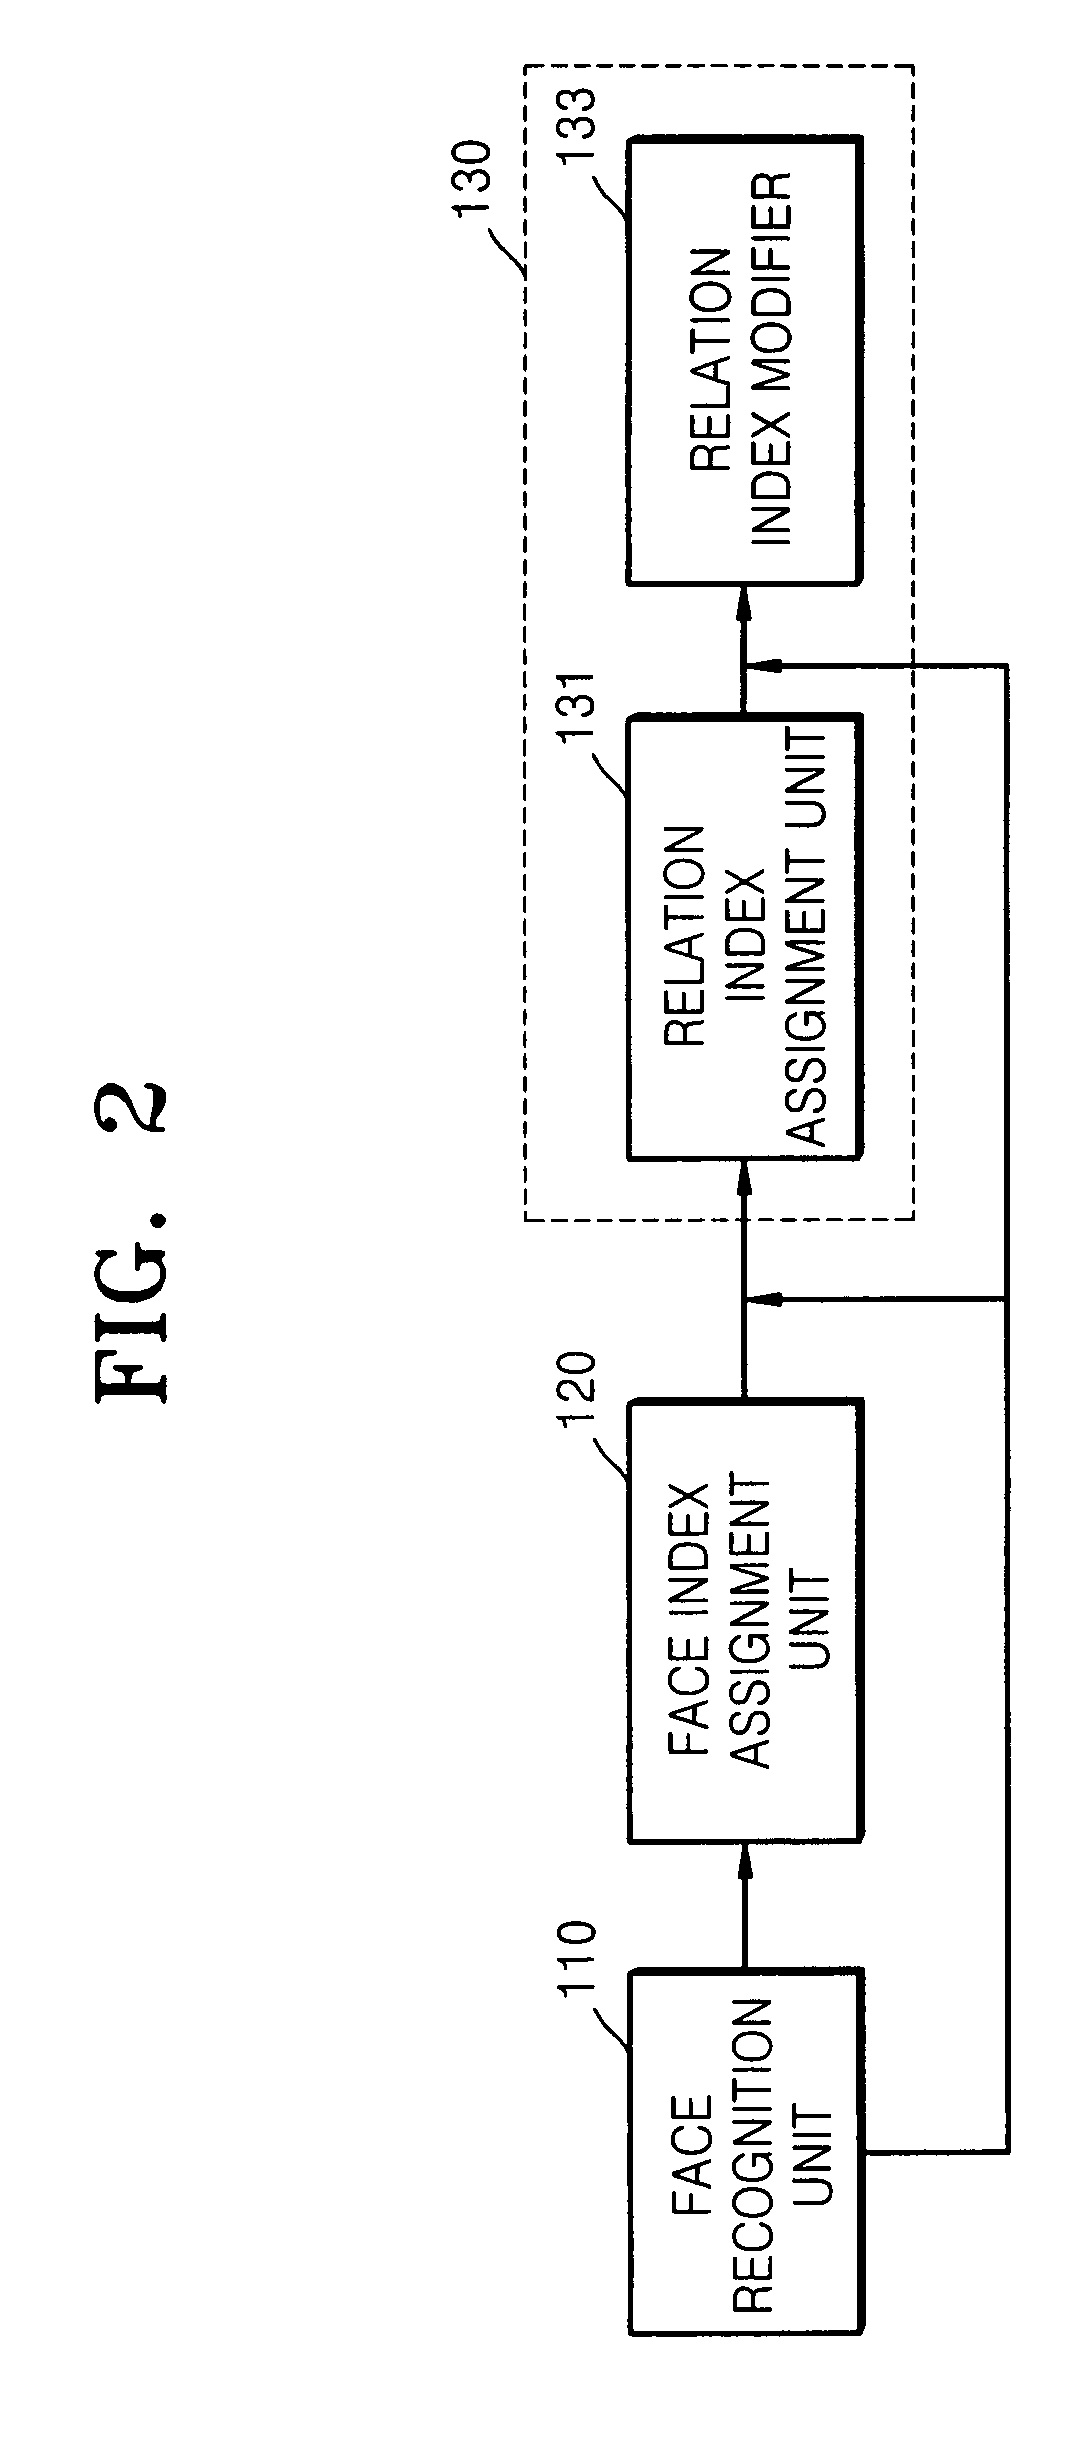 Digital image processing apparatus, method of controlling the same, and recording medium for storing program for executing the method